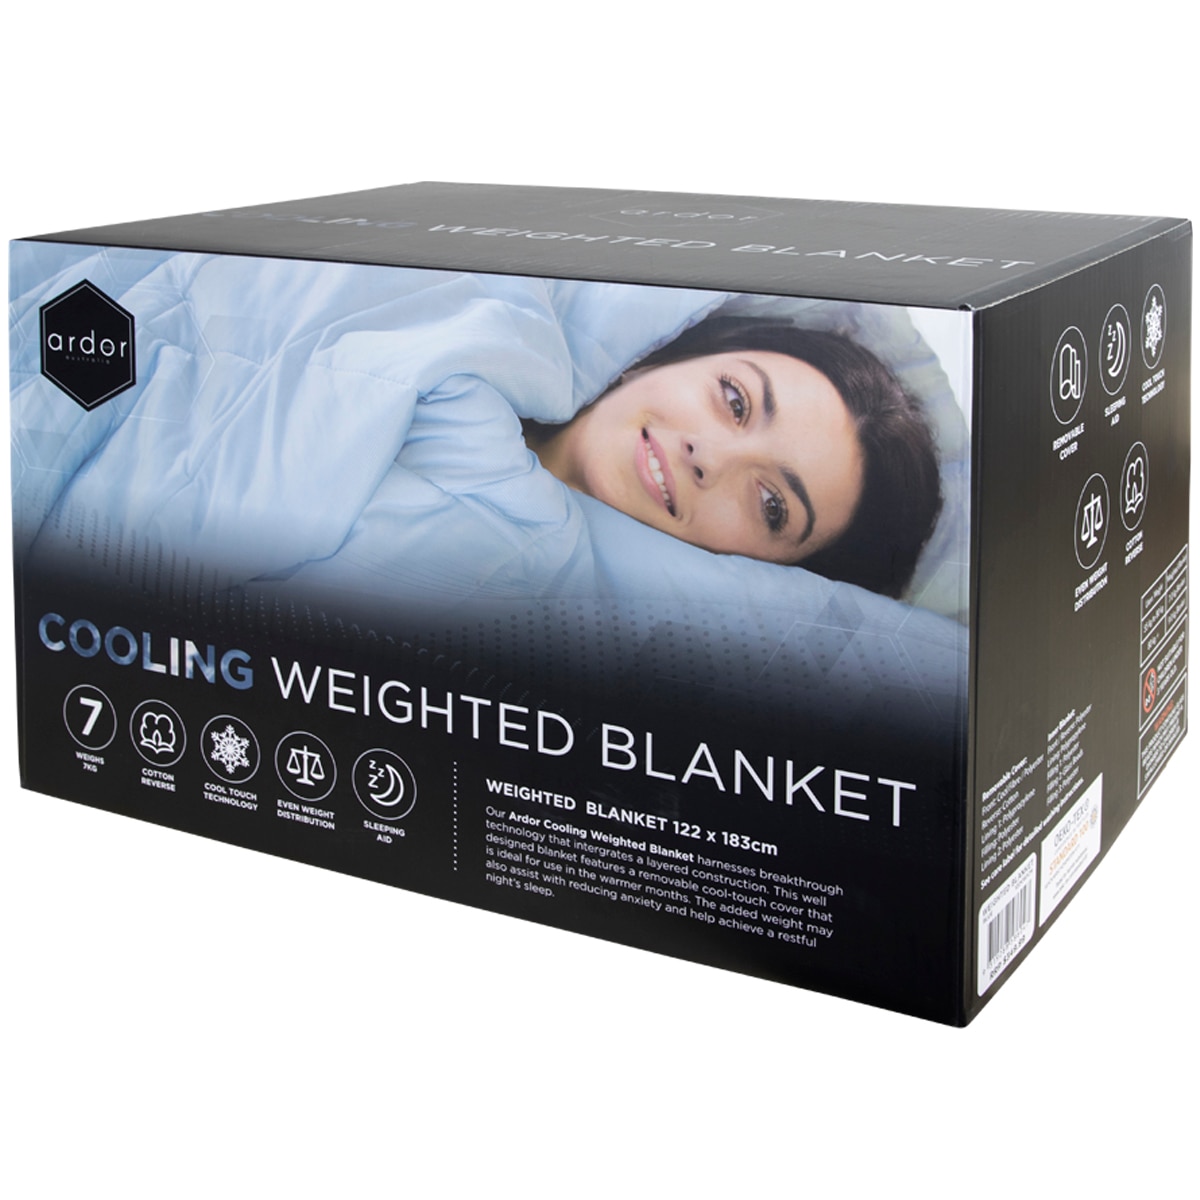 Ardor Cooling Weighted Blanket 7kg Costco Australia